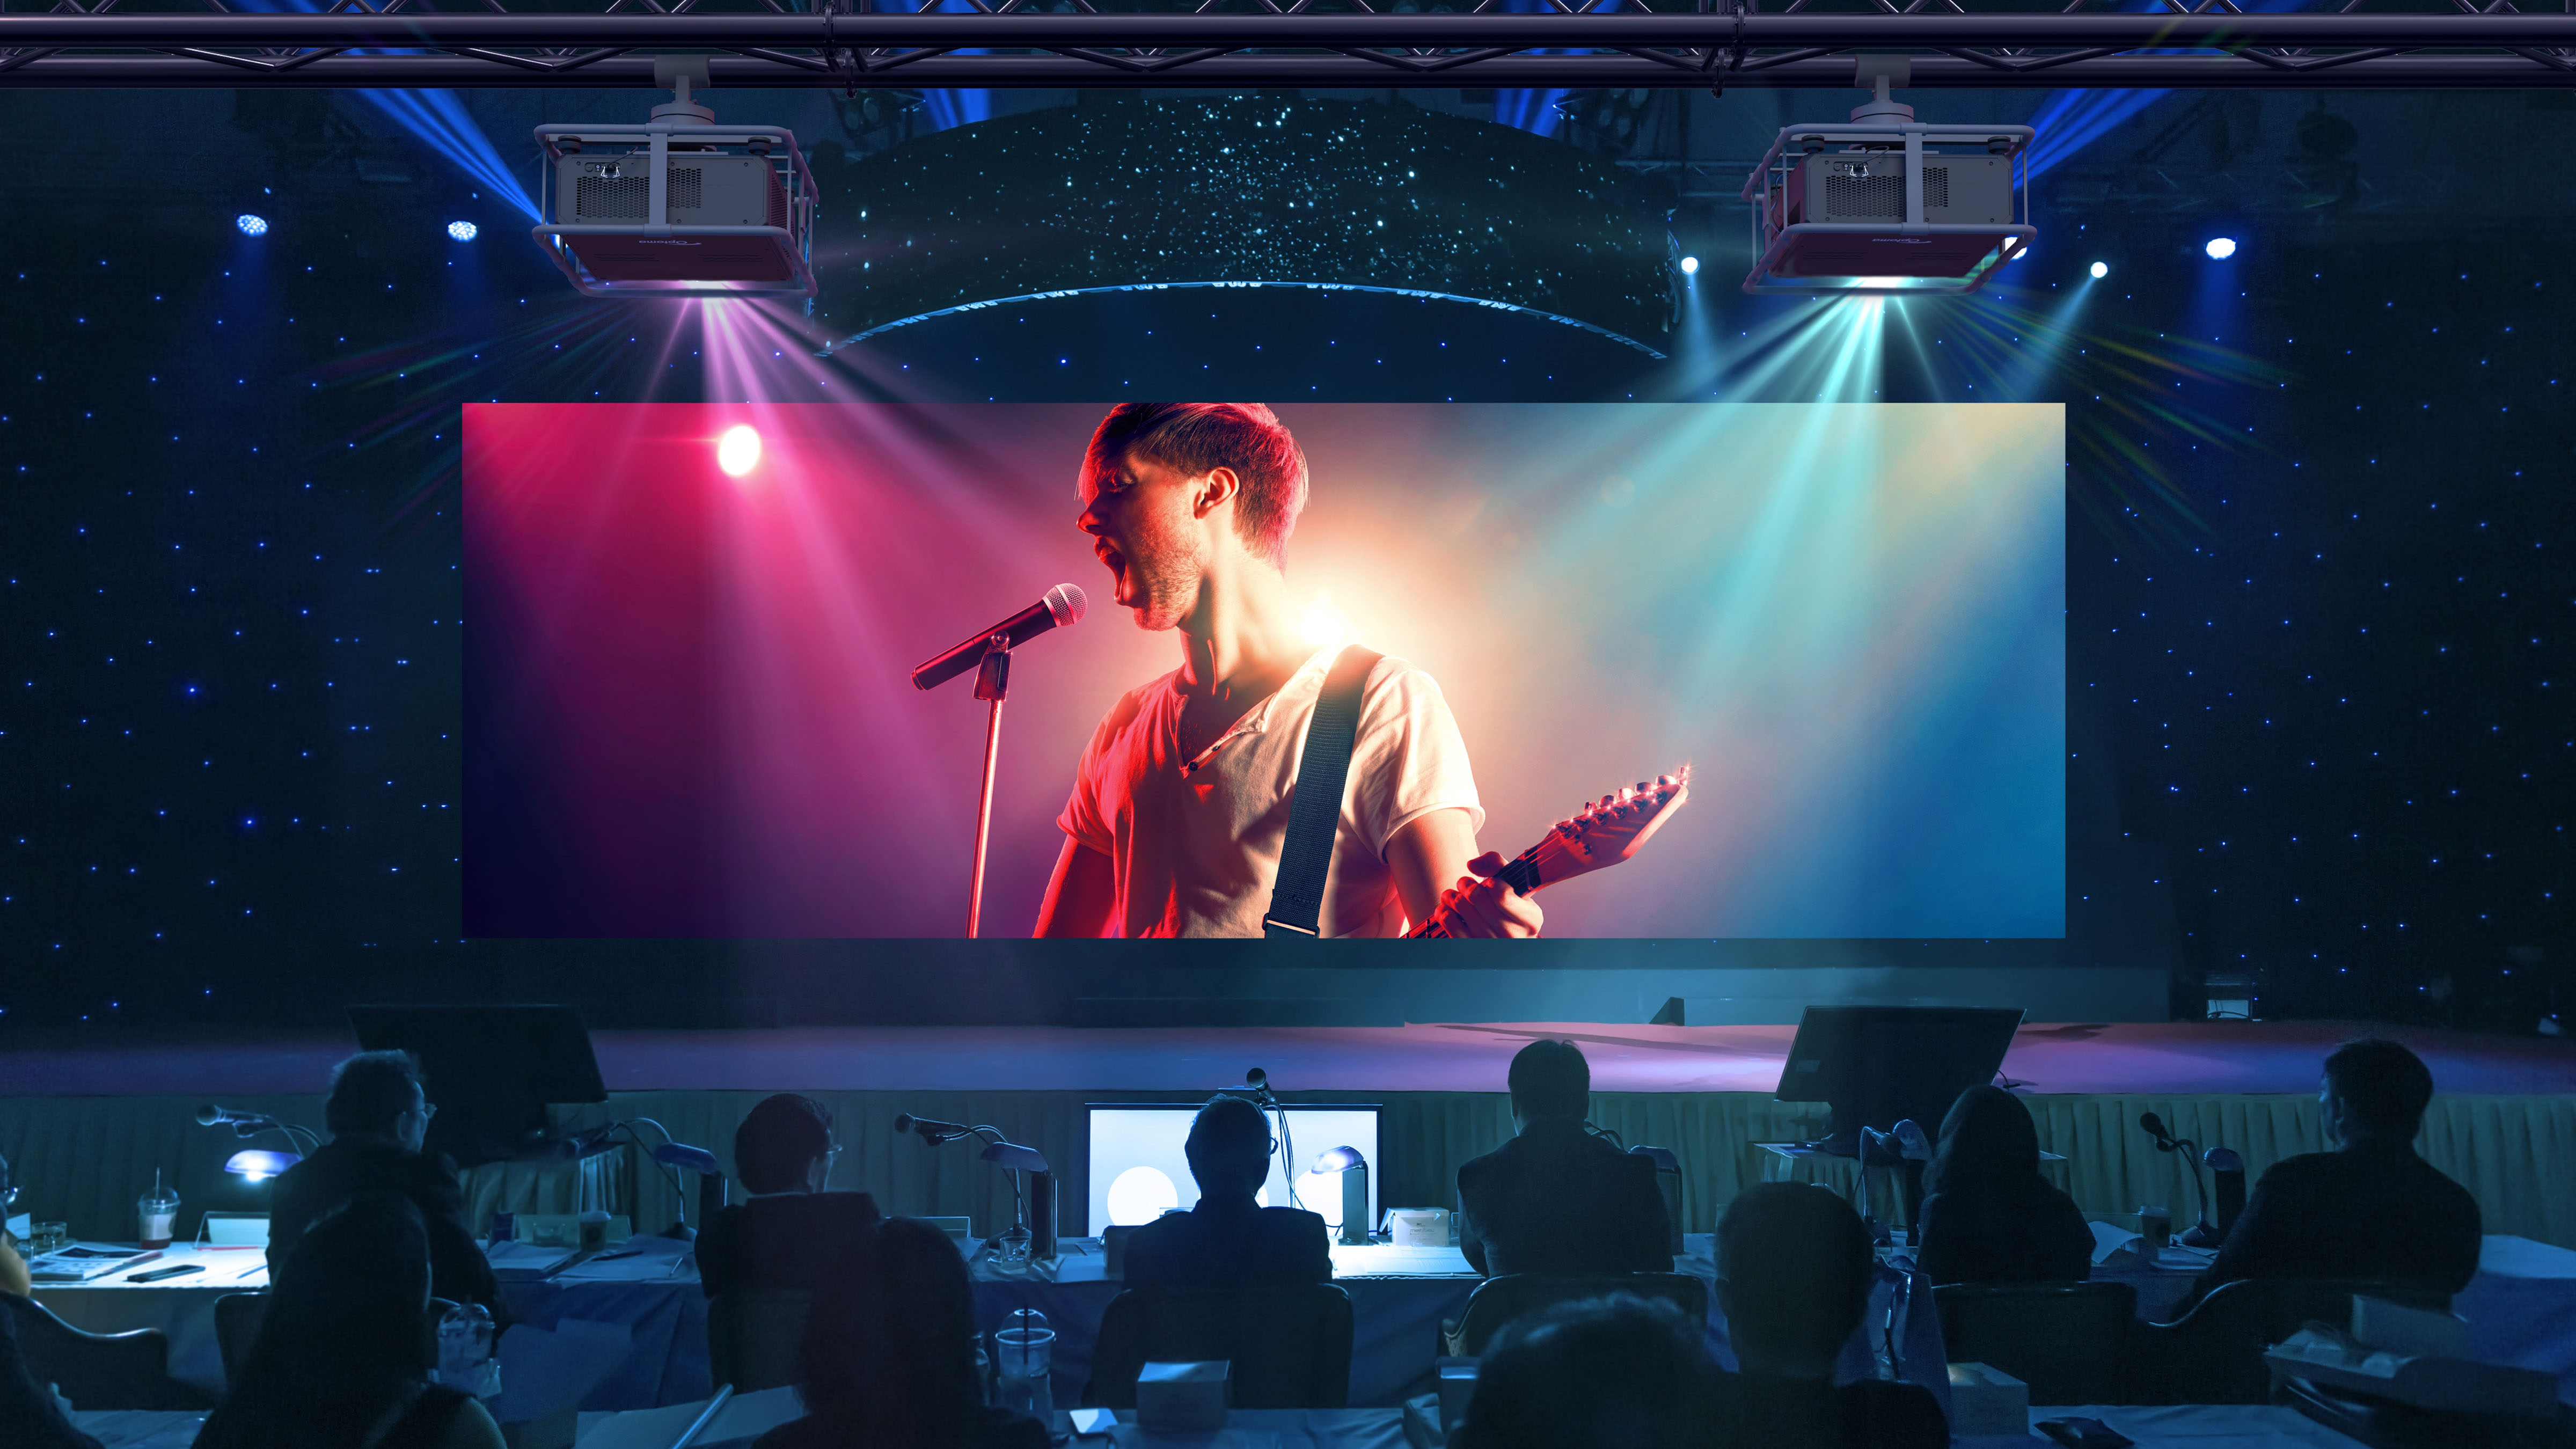 Large-Venue Projectors: Key Features for Presentations in Big Spaces | AVNetwork